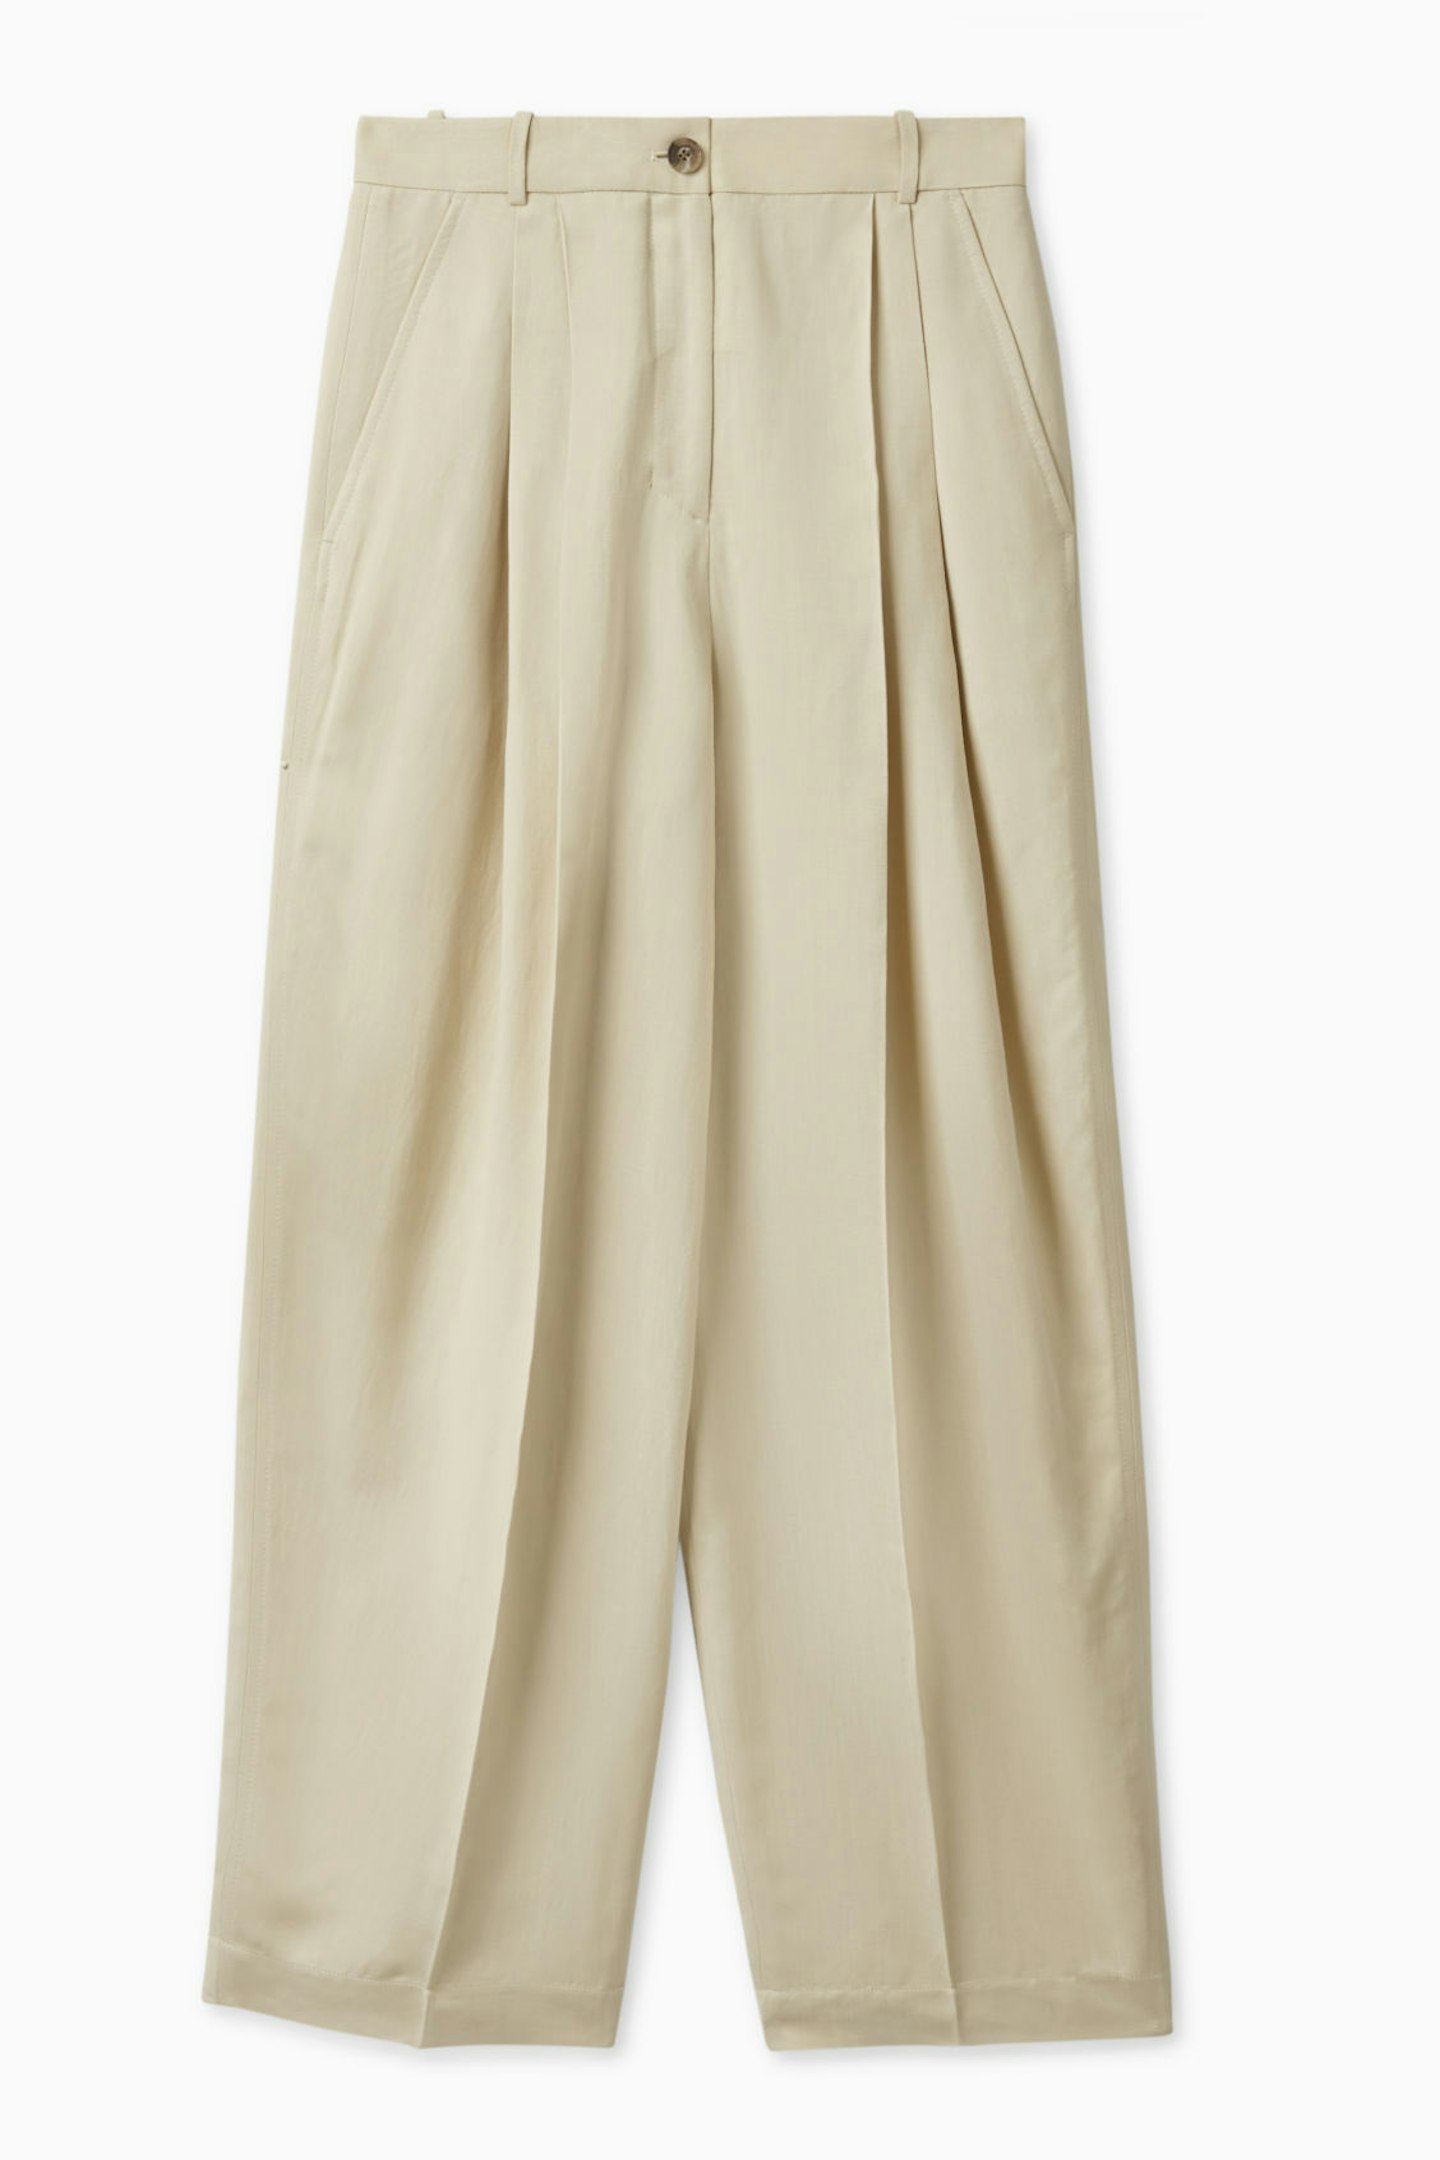 best trousers for summer   COS, Relaxed FIt Cotton Tailored Trousers, £99